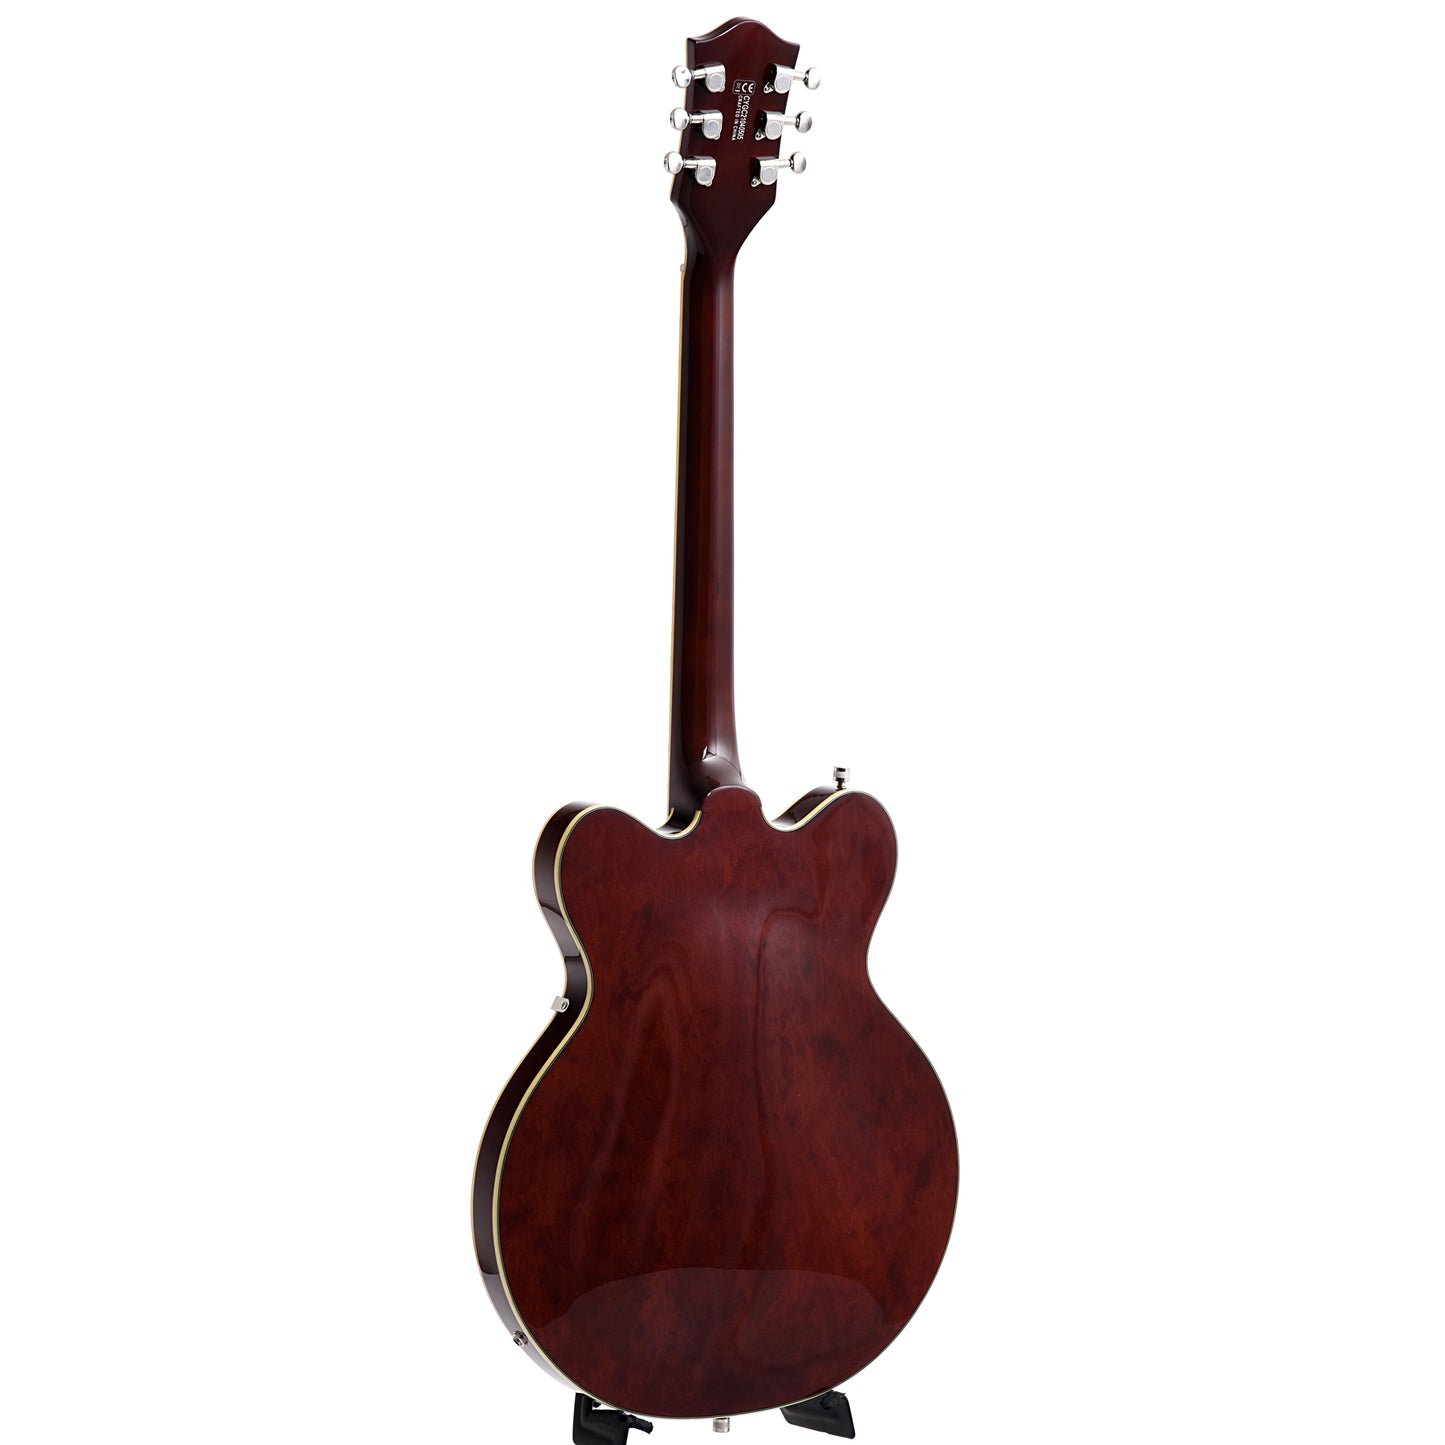 Image 12 of Gretsch G5622 Electromatic Center Block Double Cut with V-Stoptail, Aged Walnut - SKU# G5622-AW : Product Type Hollow Body Electric Guitars : Elderly Instruments